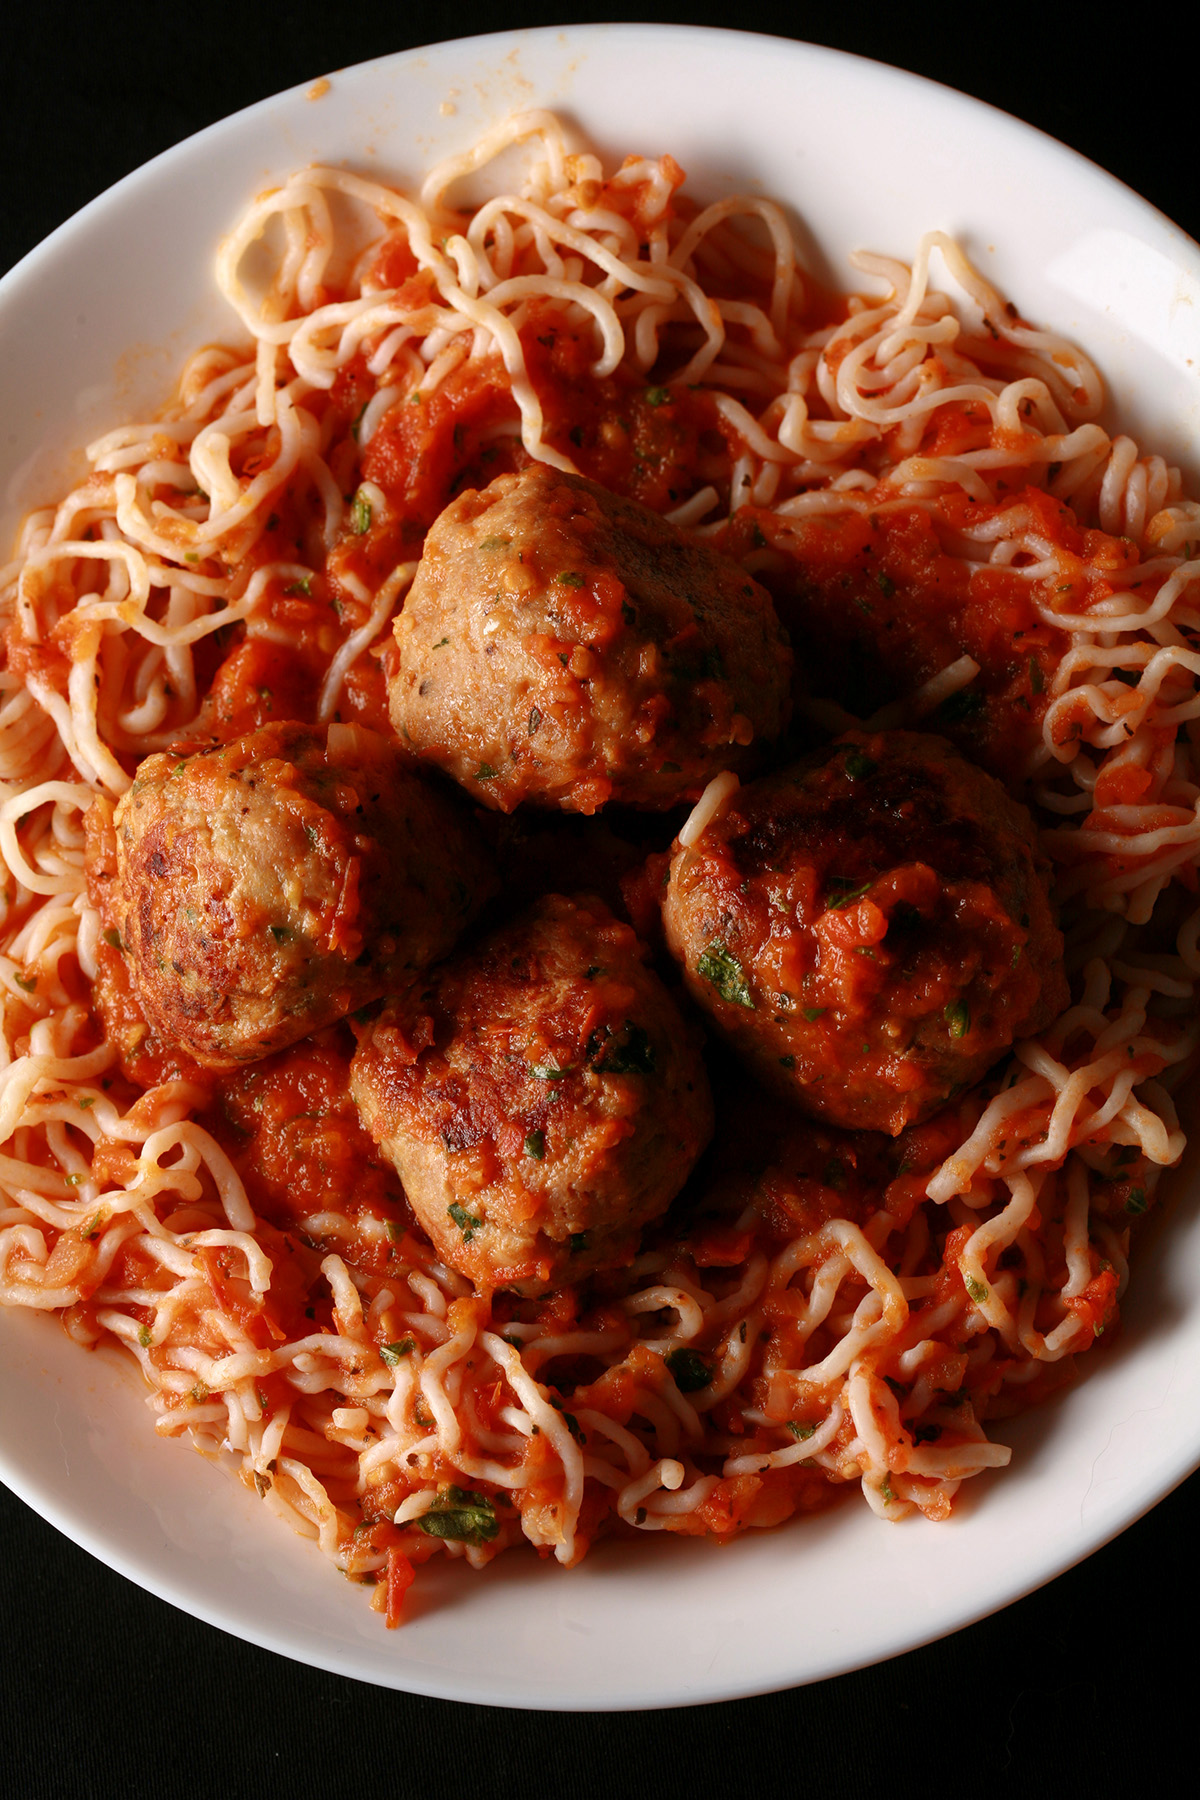 A plate of low carb spaghetti and meatballs.